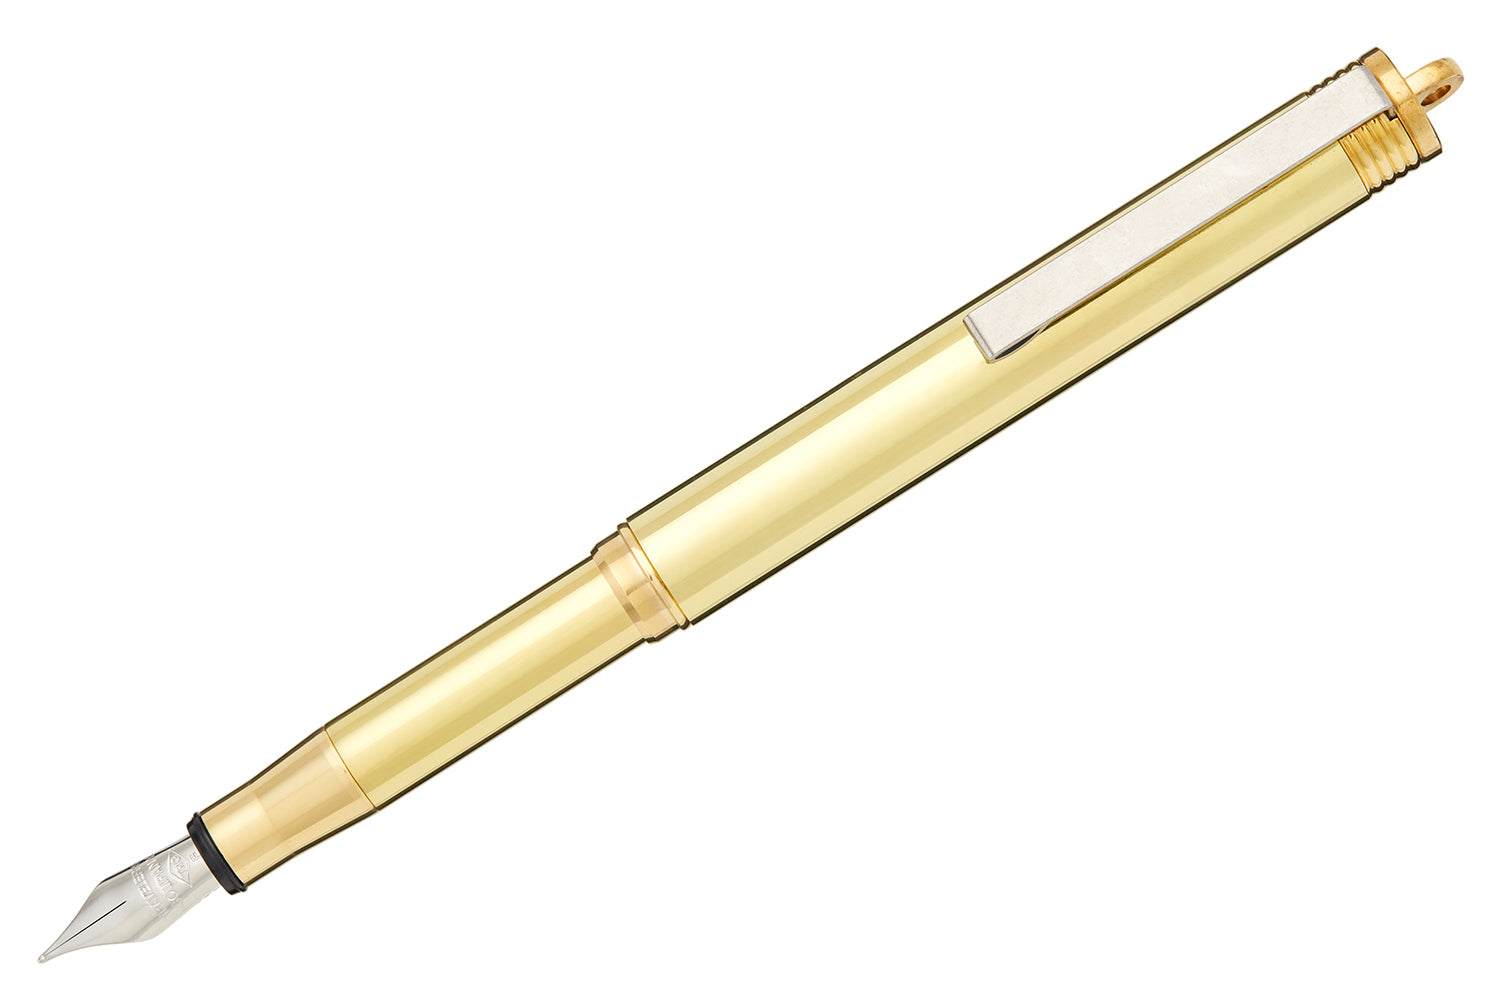 Video-Review: Traveler's Company Brass Fountain Pen - Scrively